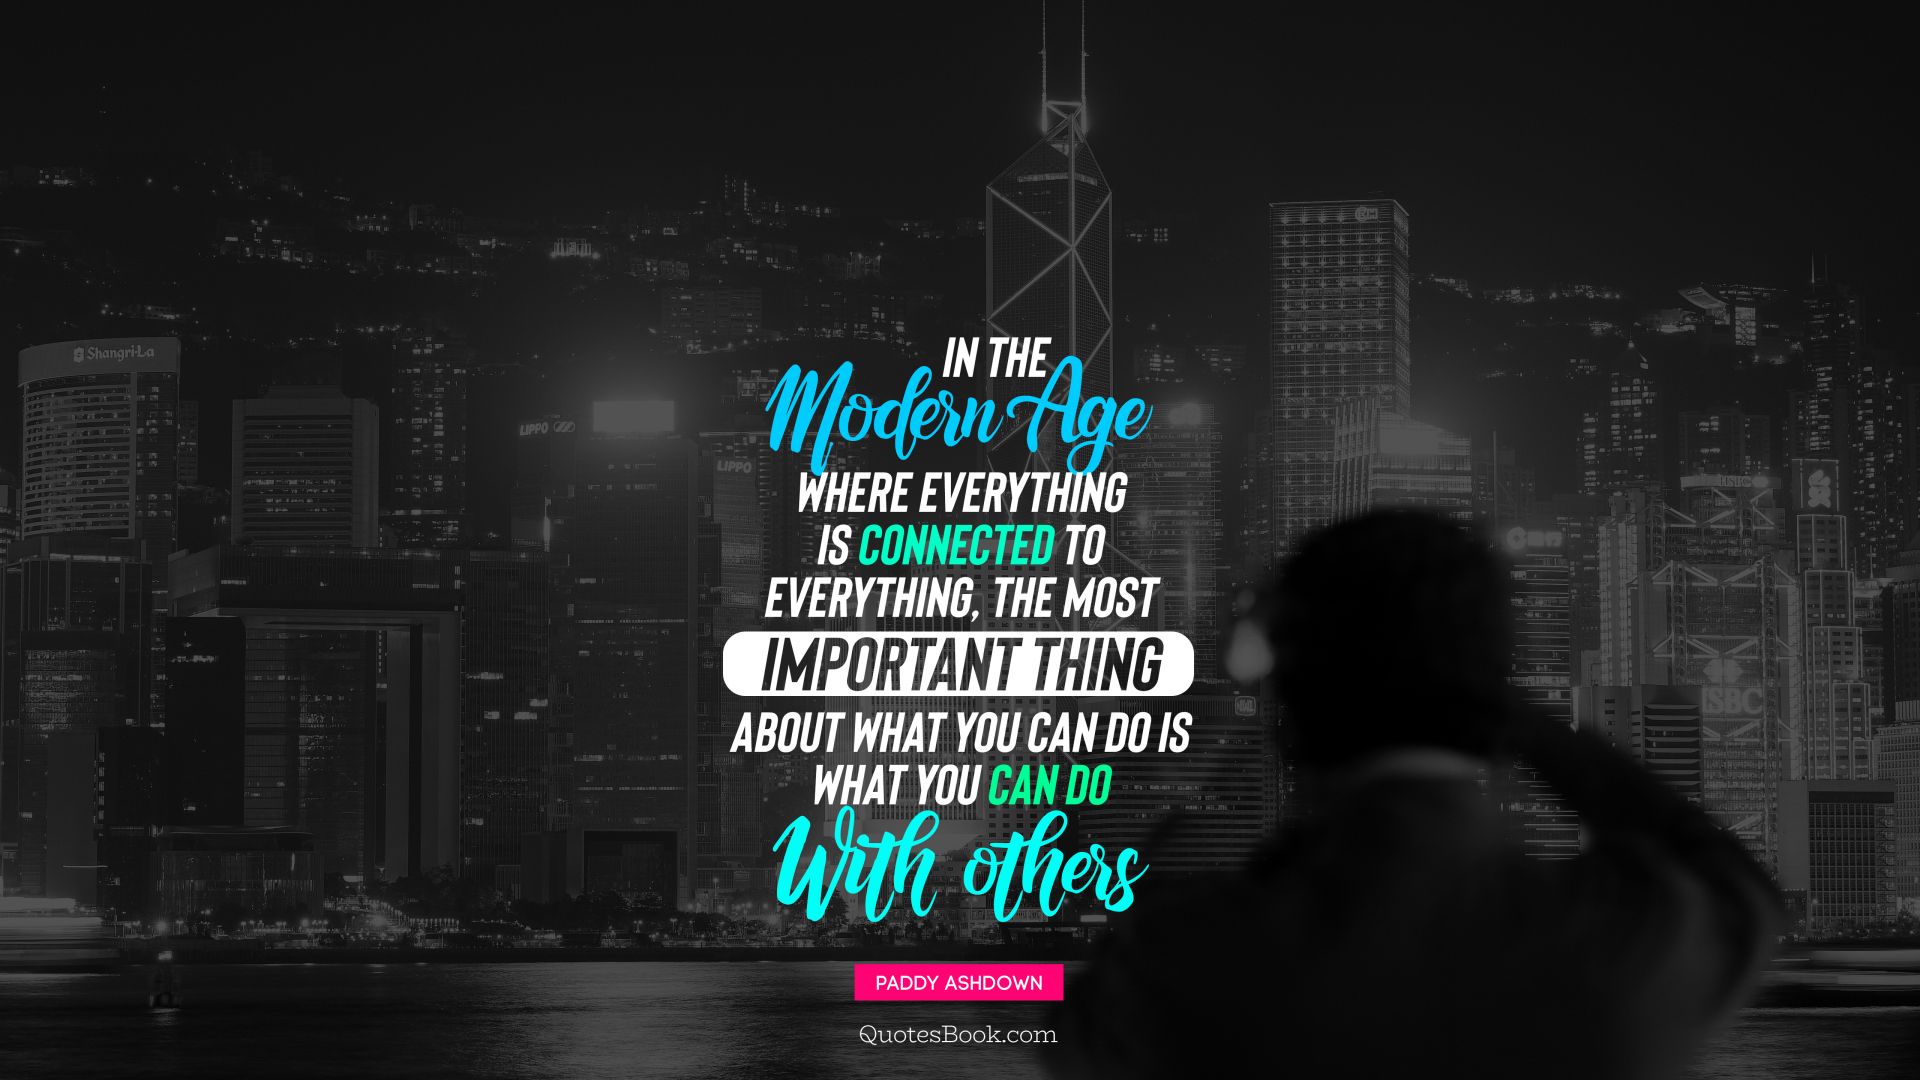 In the modern age where everything is connected to everything, the most important thing about what you can do is what you can do with others. - Quote by Paddy Ashdown